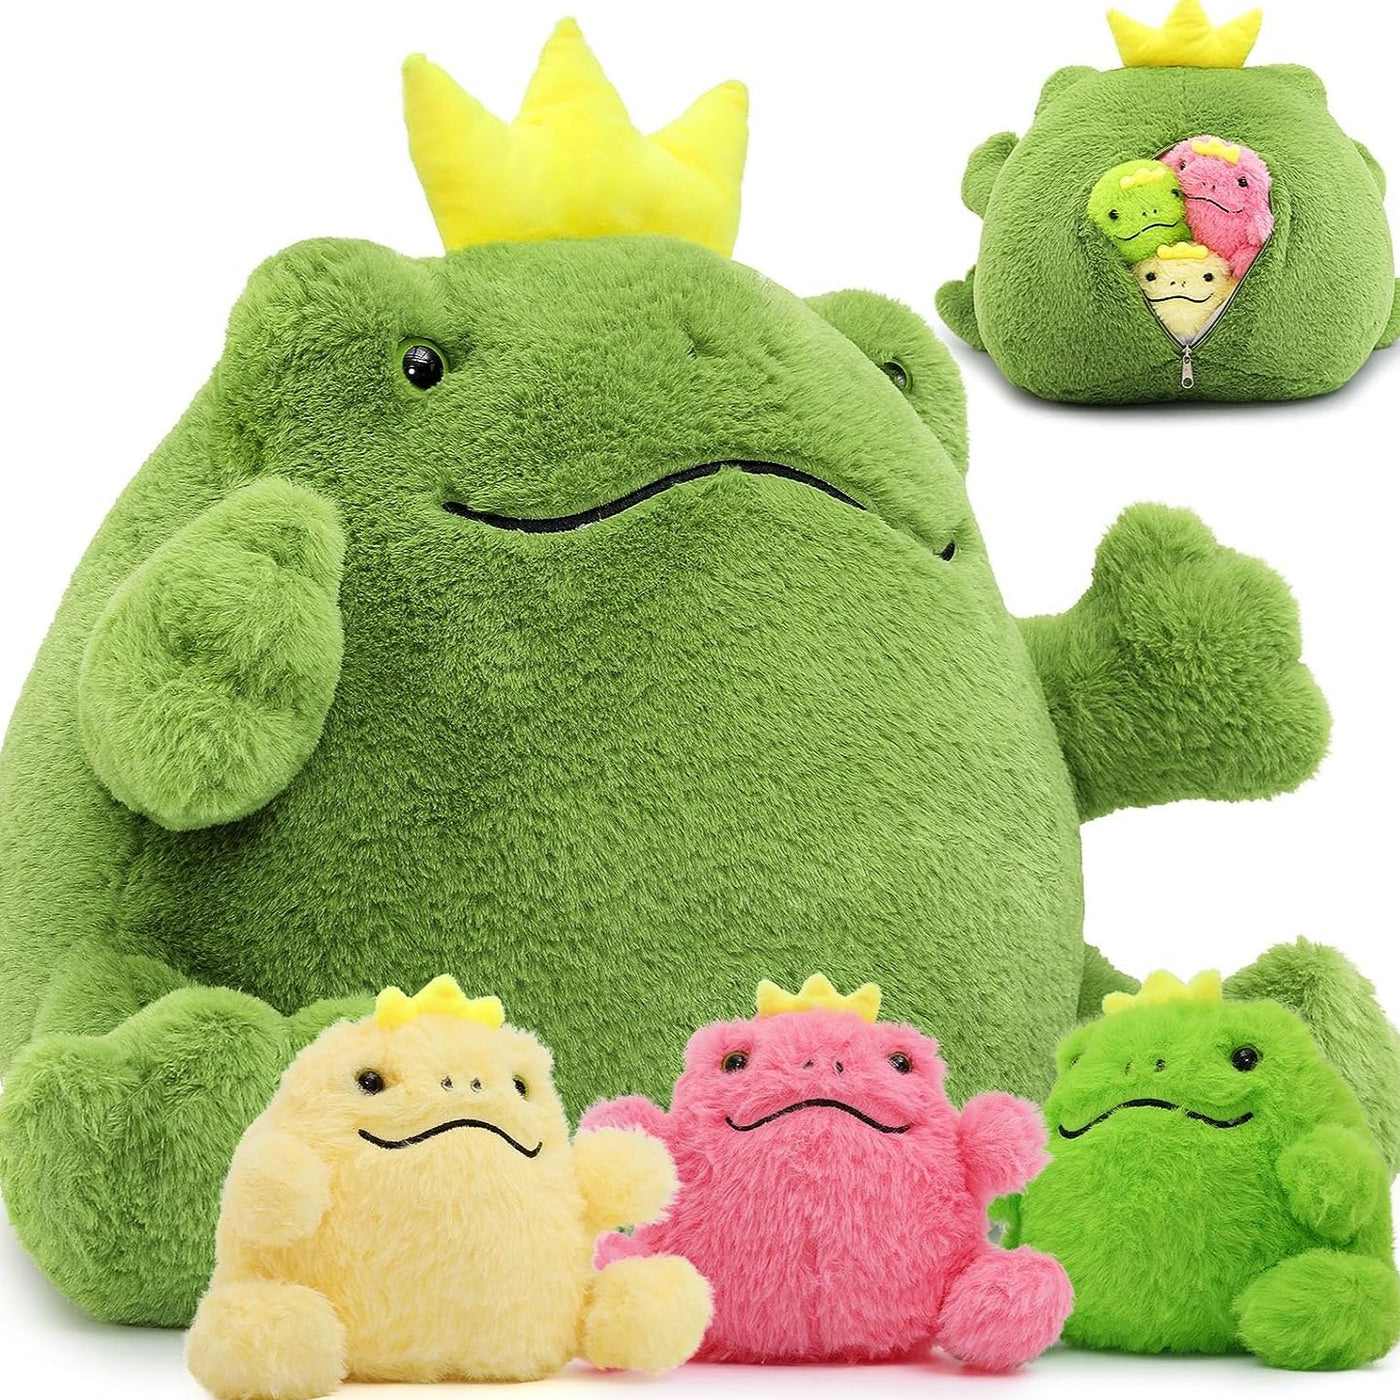 The Princess Frog Stuffed Animal Set is just adorable! In the set, you'll find one big, cuddly frog and three even more adorable miniature frog babies. Here's the fun part, these little ones come hidden inside a zipper pouch in the back of the mama frog.